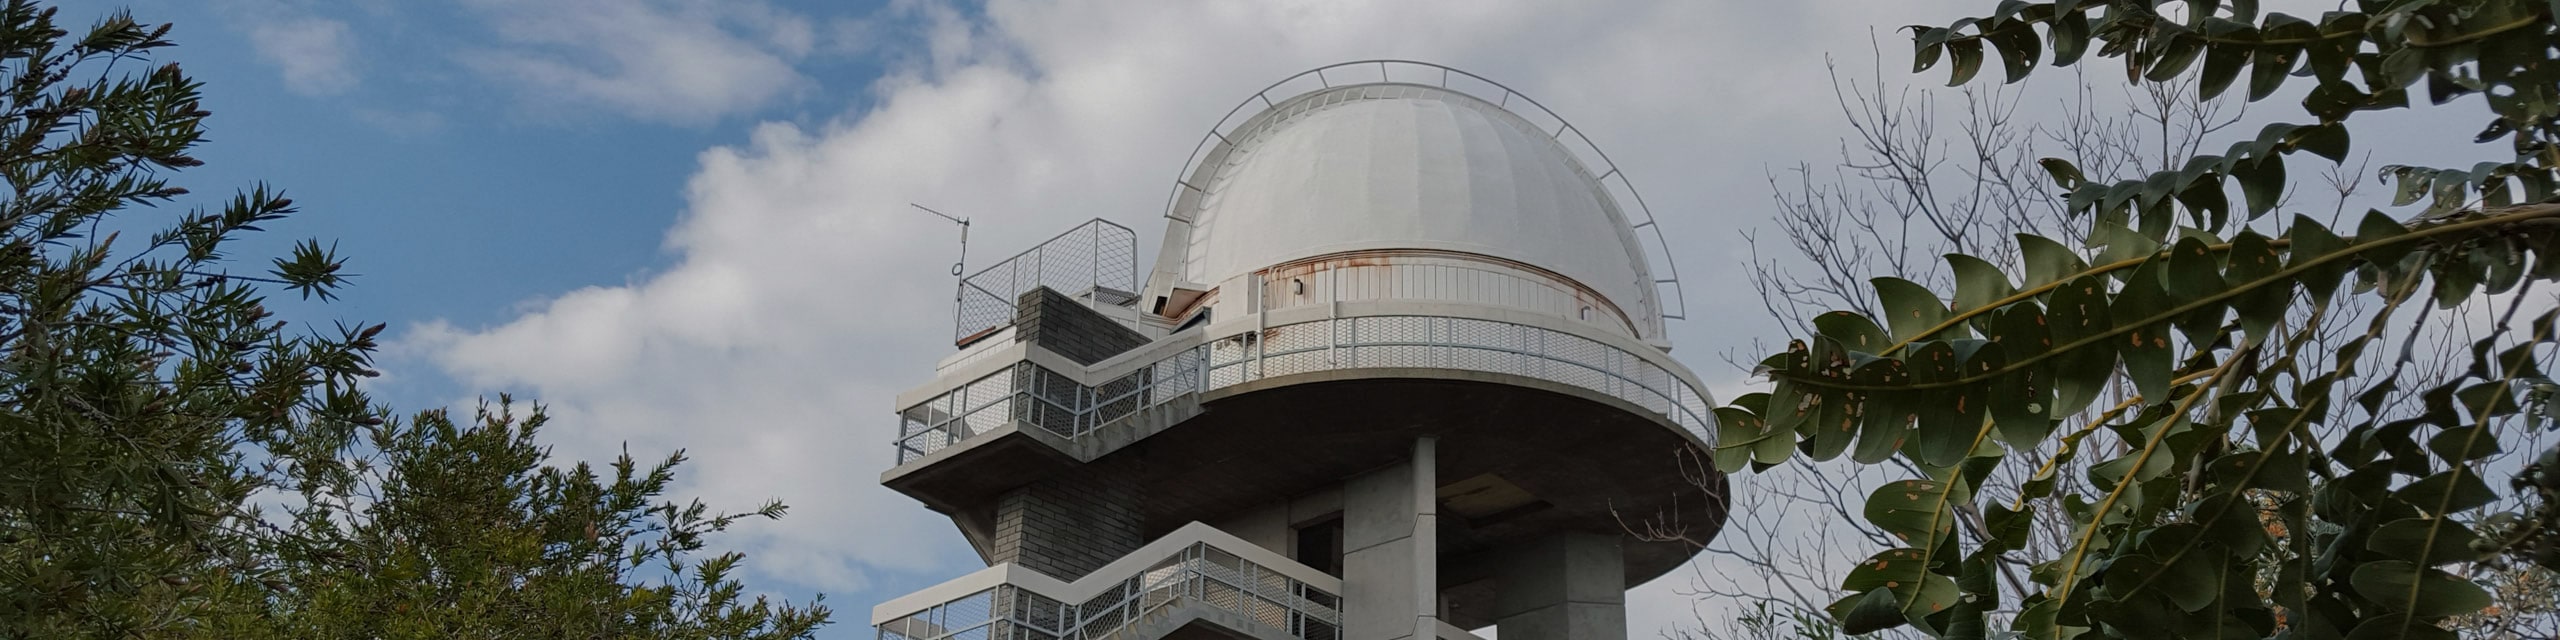 Guided Day Tours - Welcome To The Perth Observatory